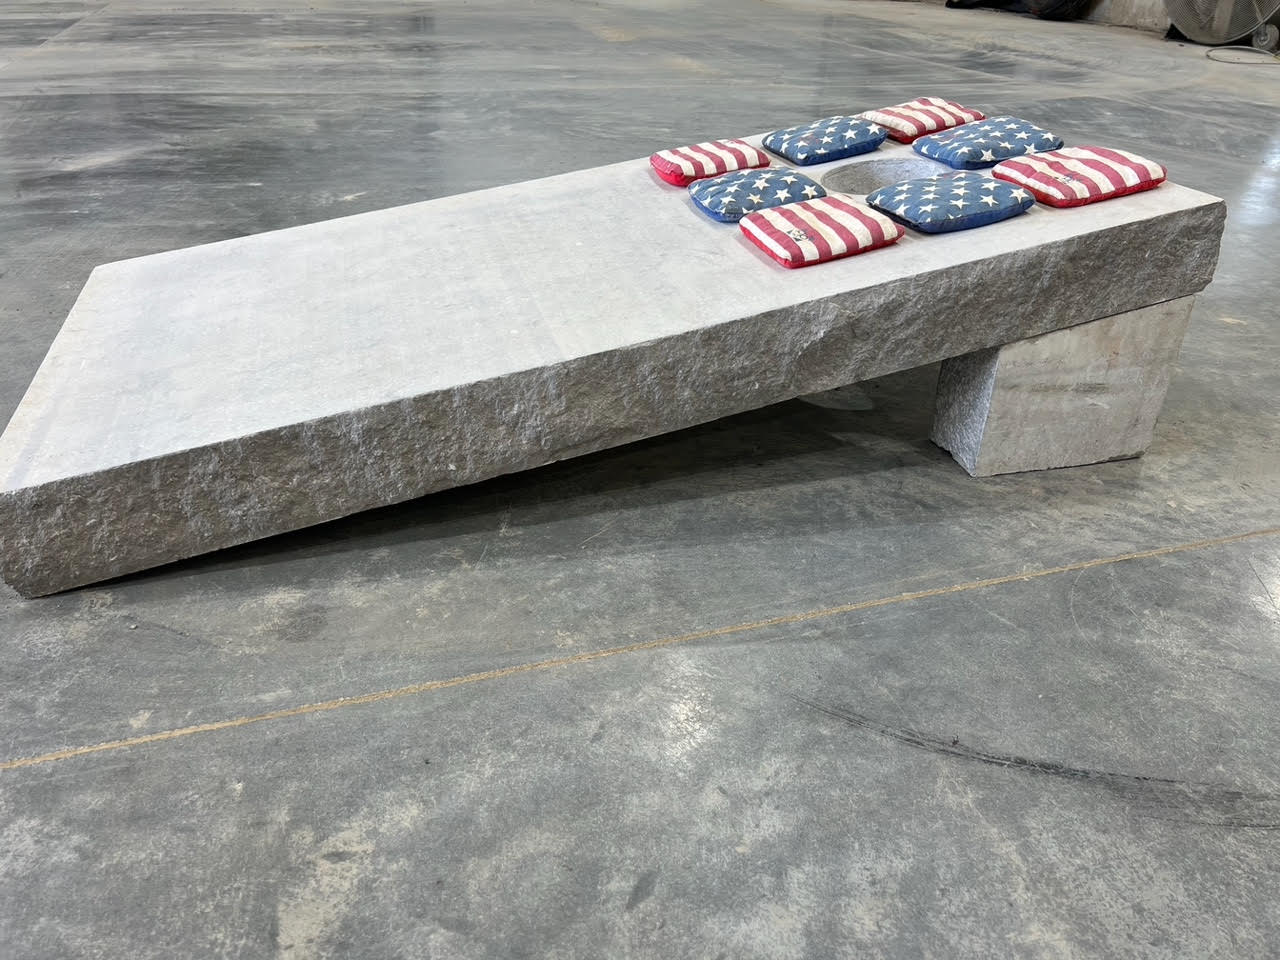 a custom cornhole board made out of stone with red, white, and blue bags on top.